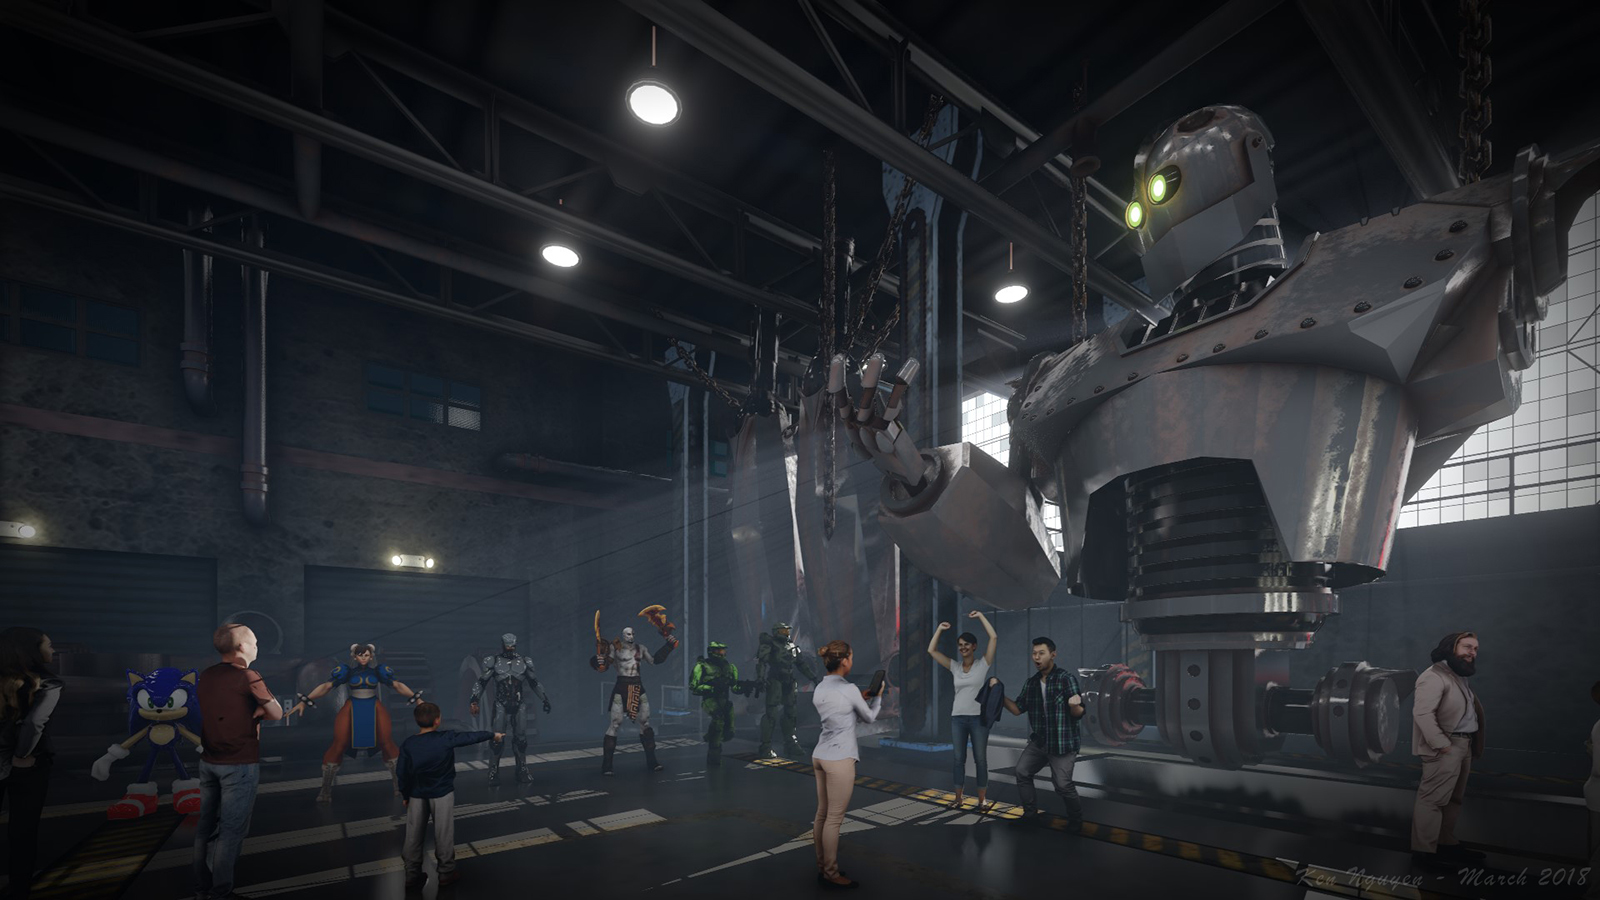 Ready_Player_One_Experiential_Iron_giant_factory_view_06.jpg